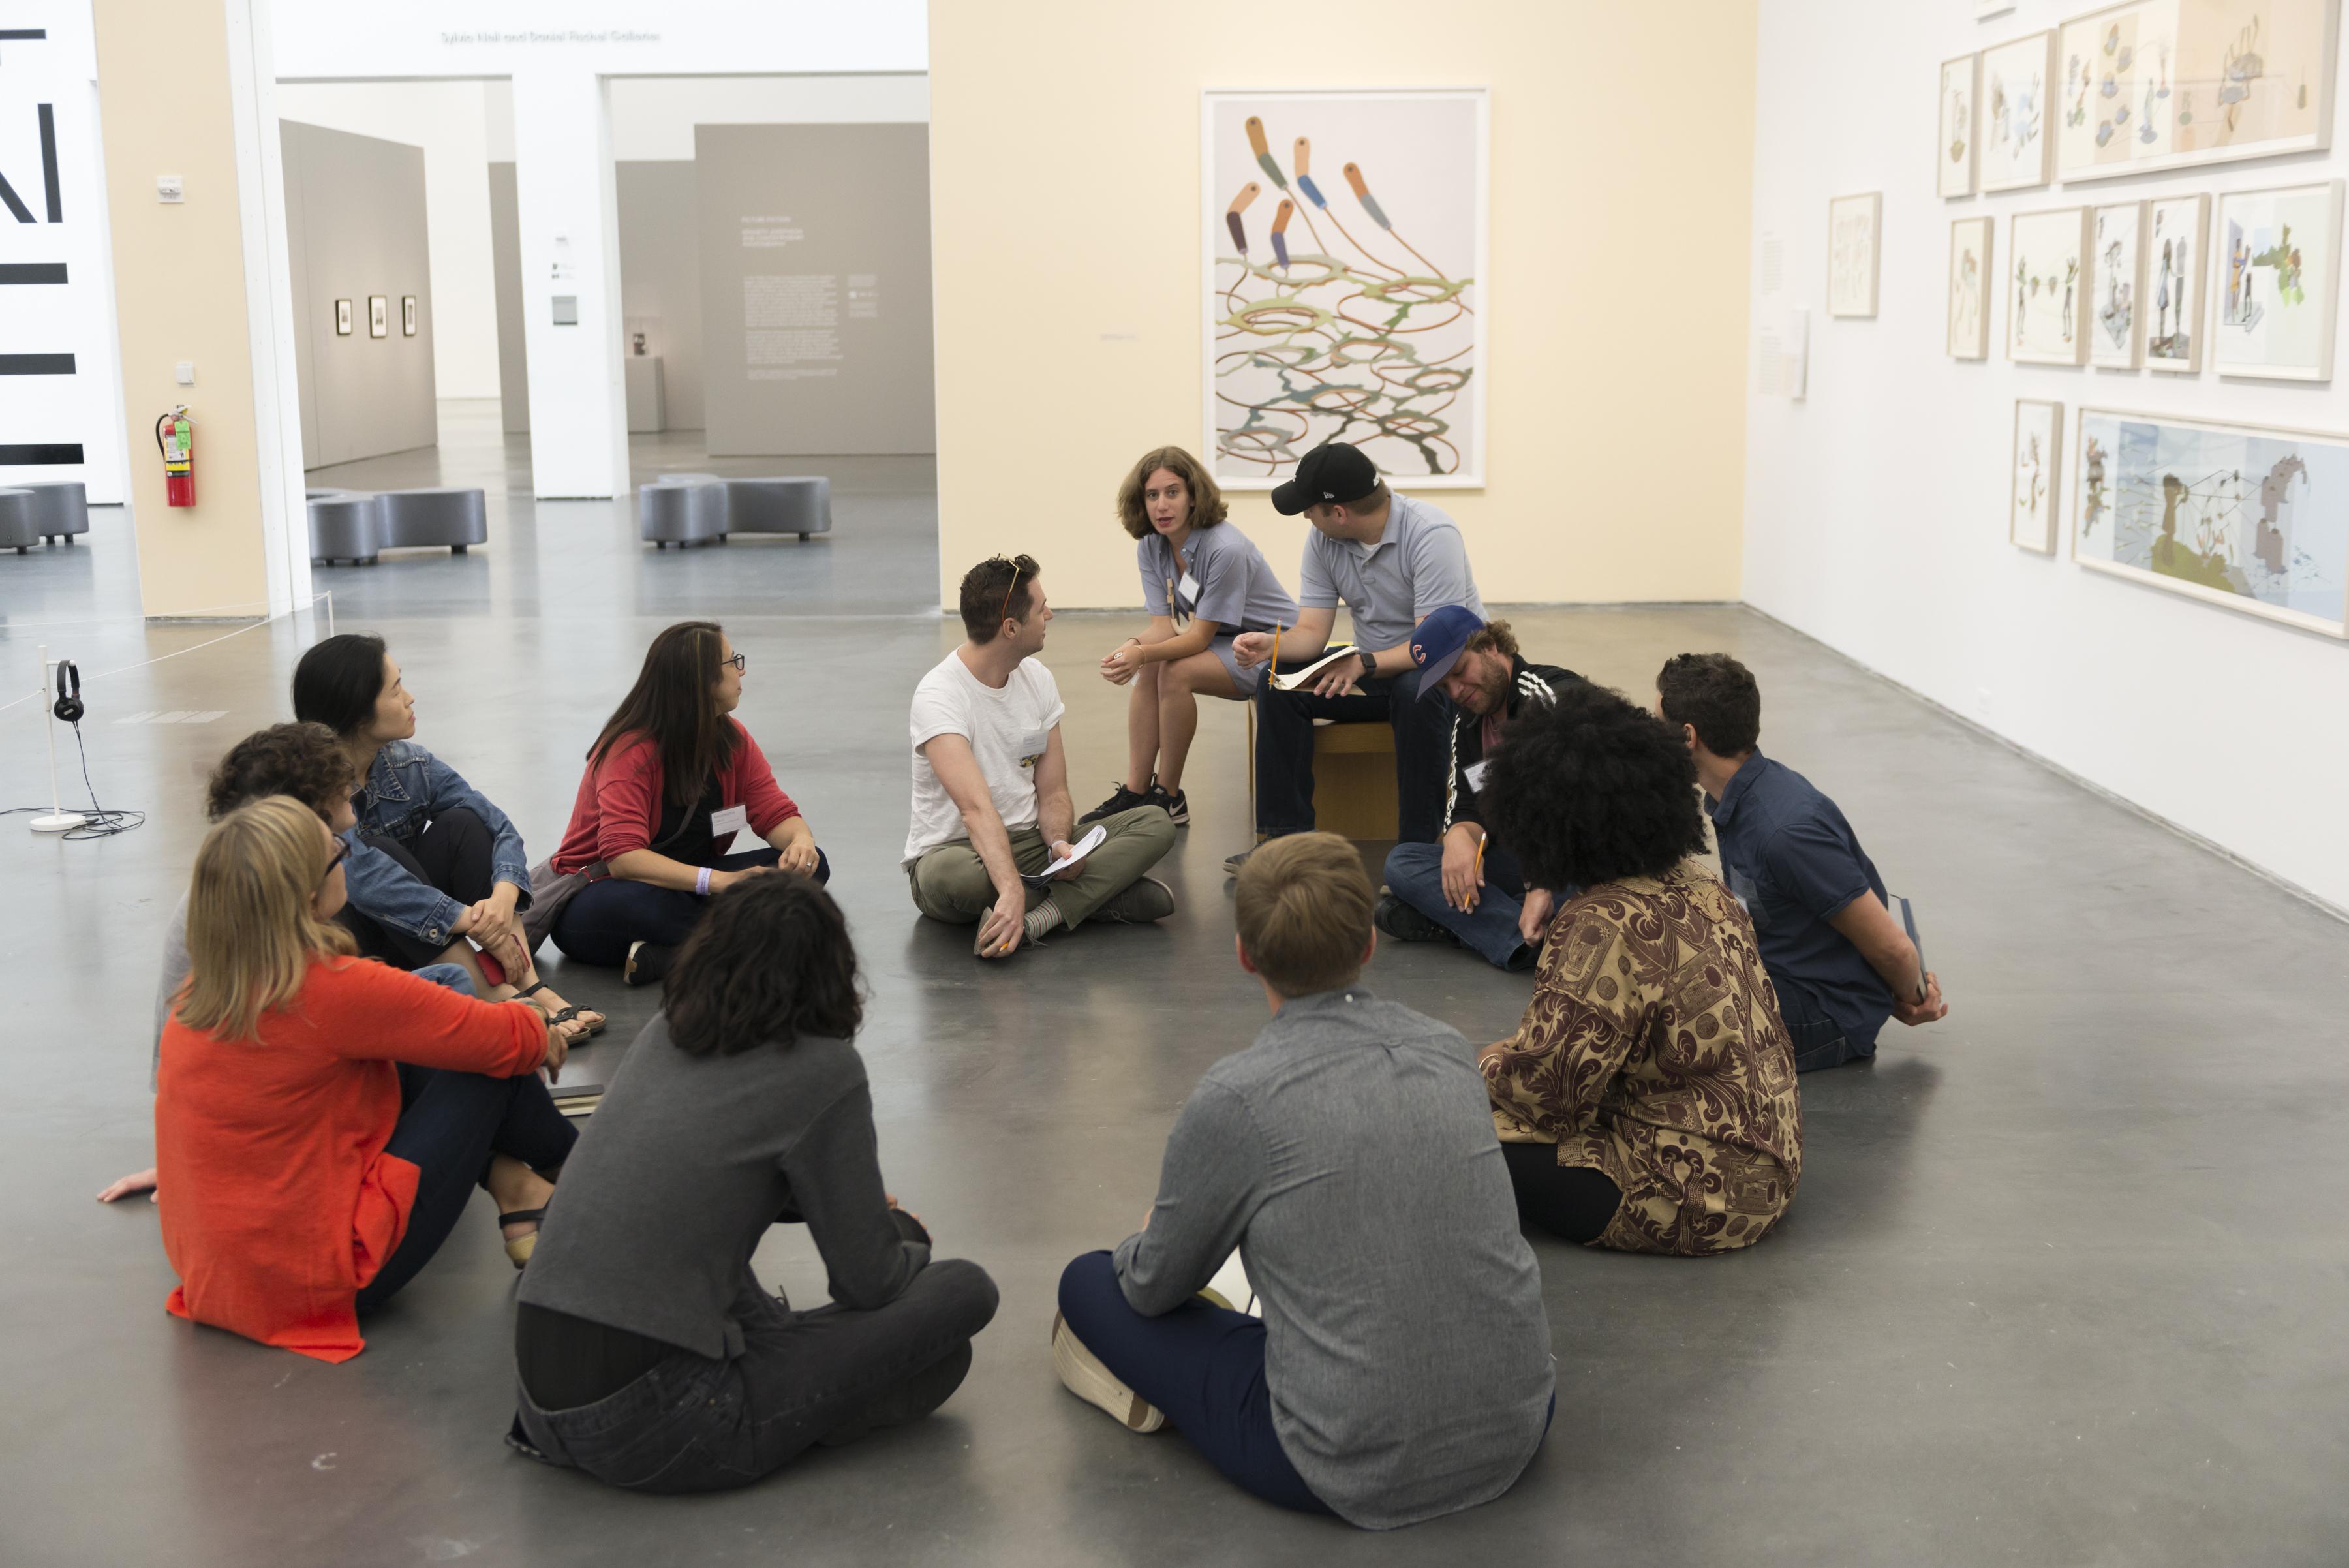 A group circled sitting on floor in gallery space